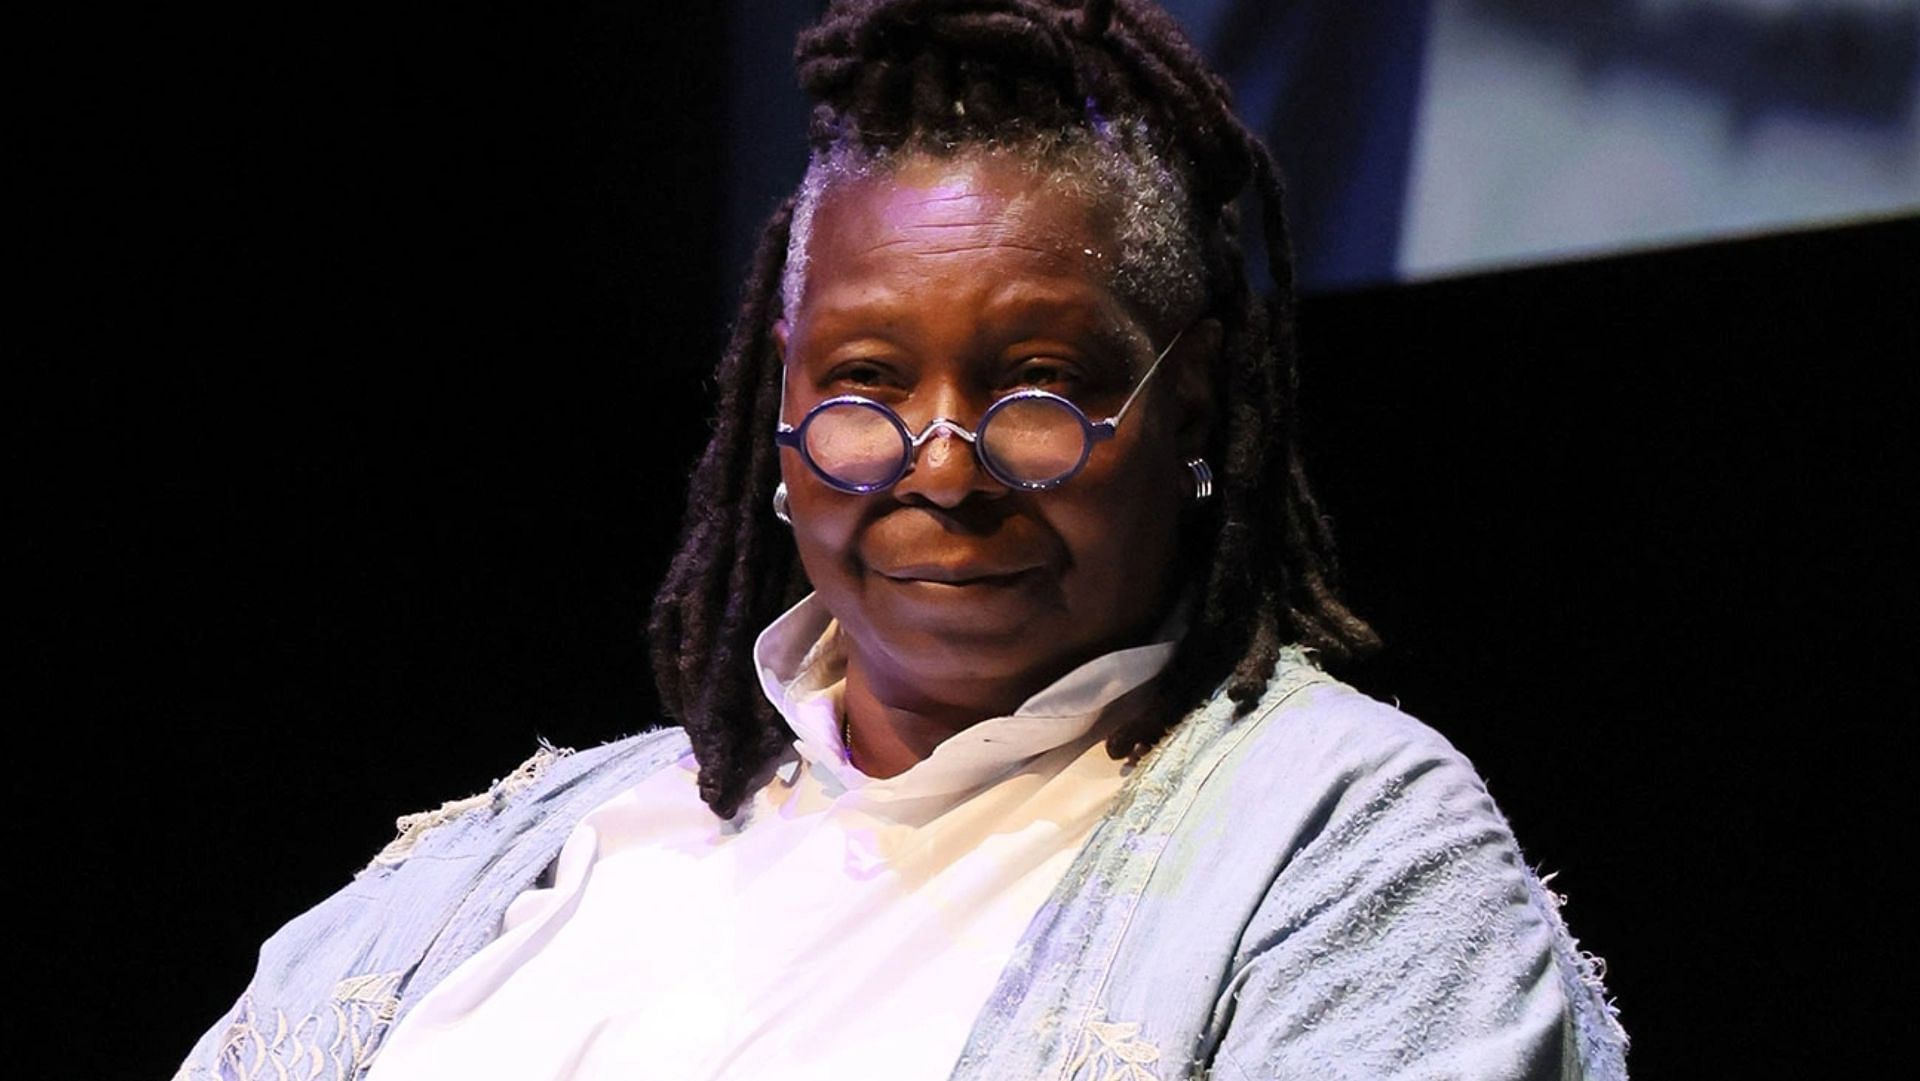 Whoopi Goldberg called Twitter &quot;a mess.&quot; (Image via Dia Dipasupil/Getty)